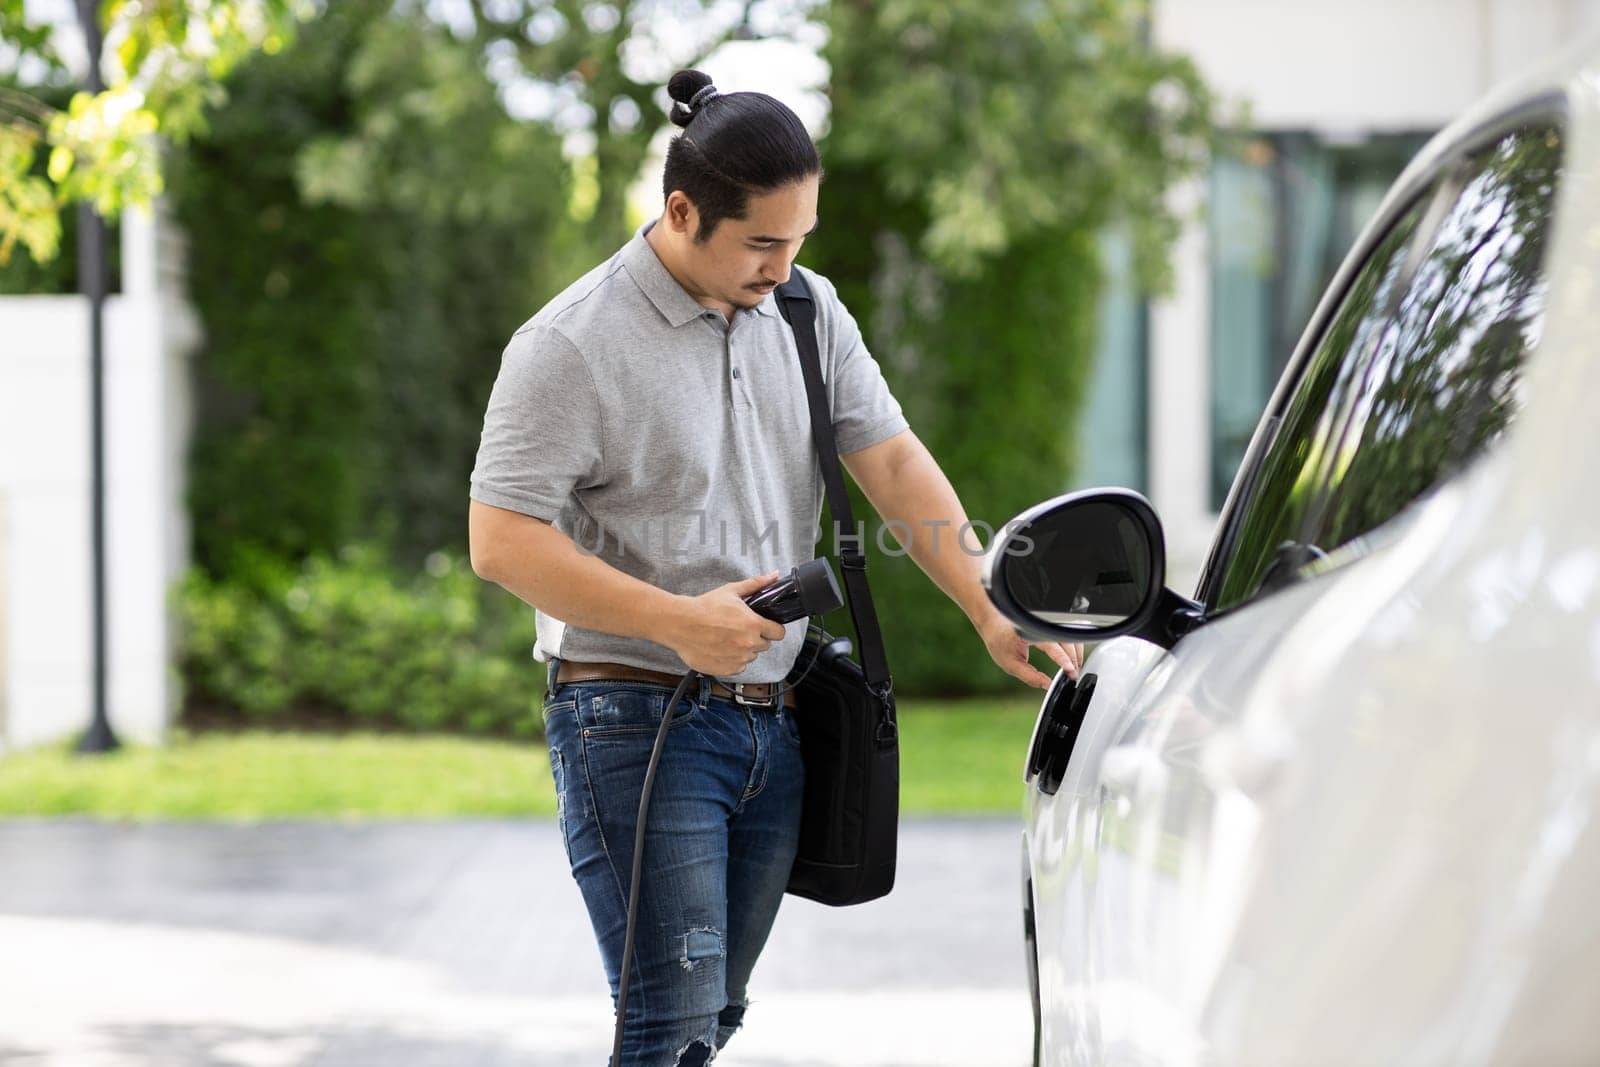 Progressive asian man install cable plug to his electric car with home charging station in the backyard. Concept use of electric vehicles in a progressive lifestyle contributes to clean environment.